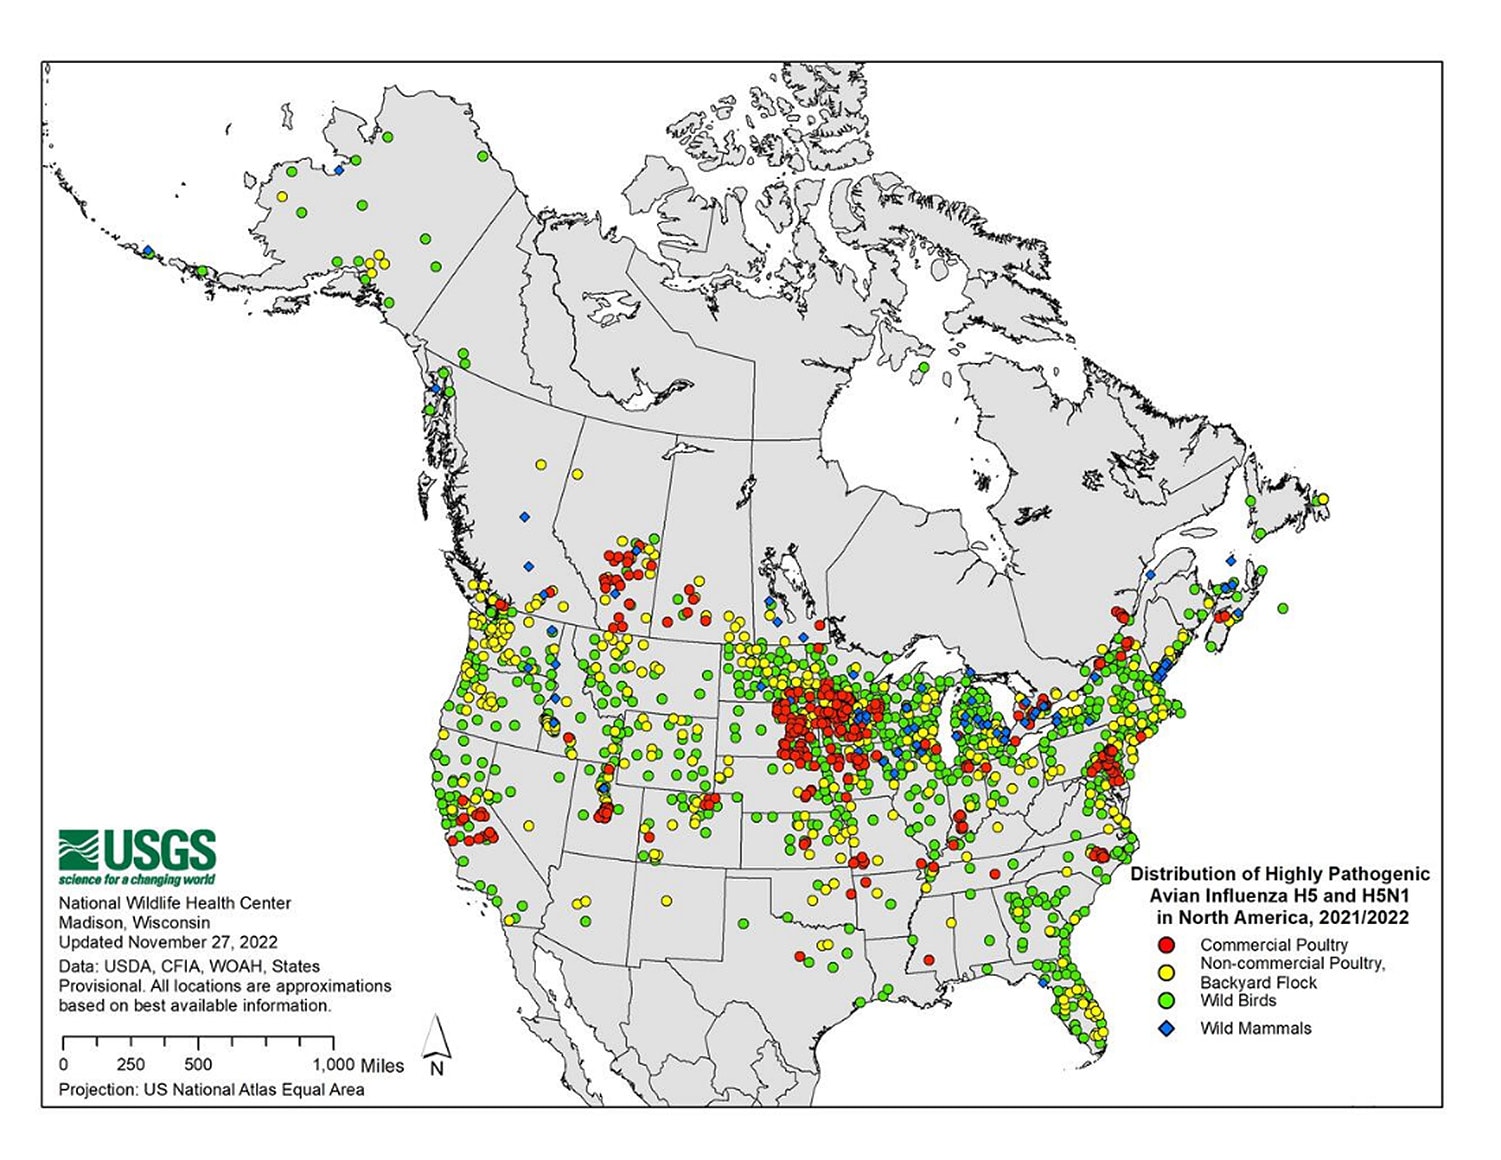 map of North America with different color dots showing the Distribution of Highly Pathogenic Avian Influenza H5 an H5N1 in North America, 2021/2022